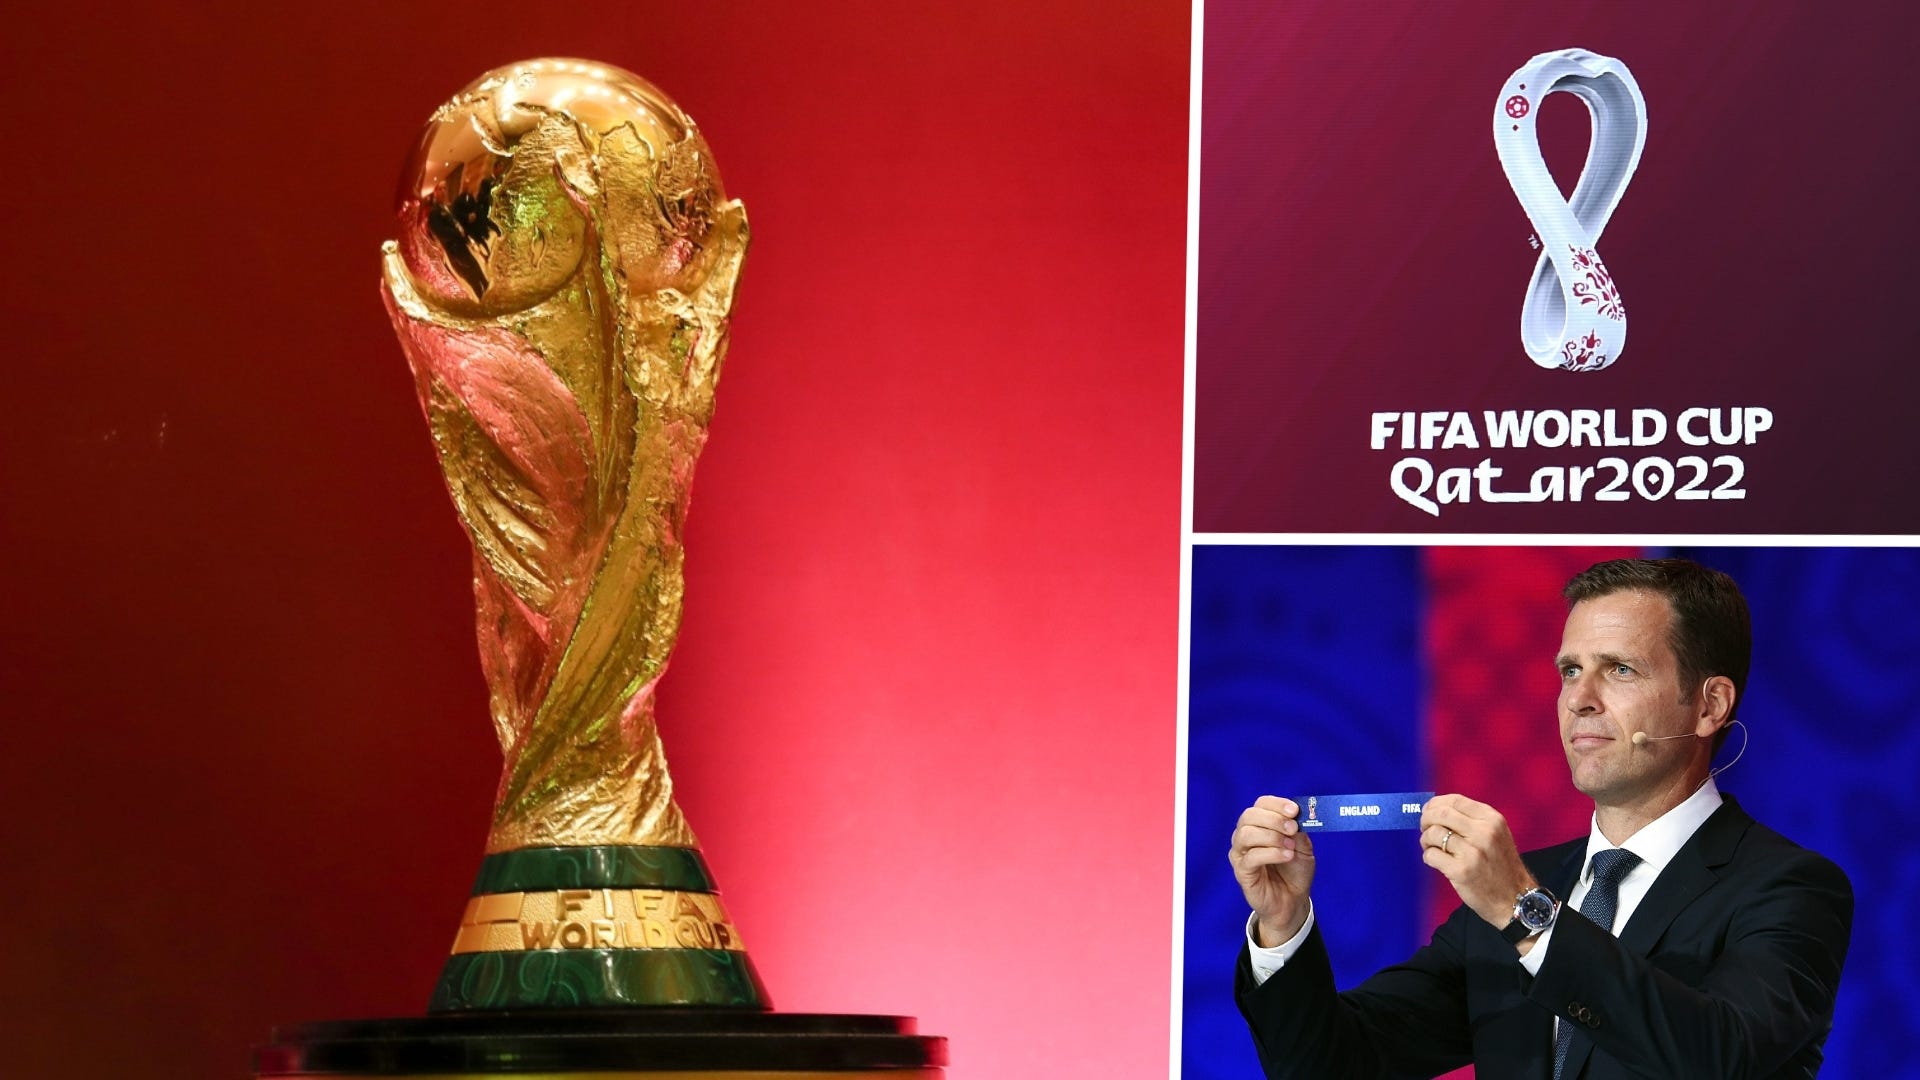 World Cup 2022 group stage draw: When, how to watch and stream, fifa world cup 2022 - hpnonline.org